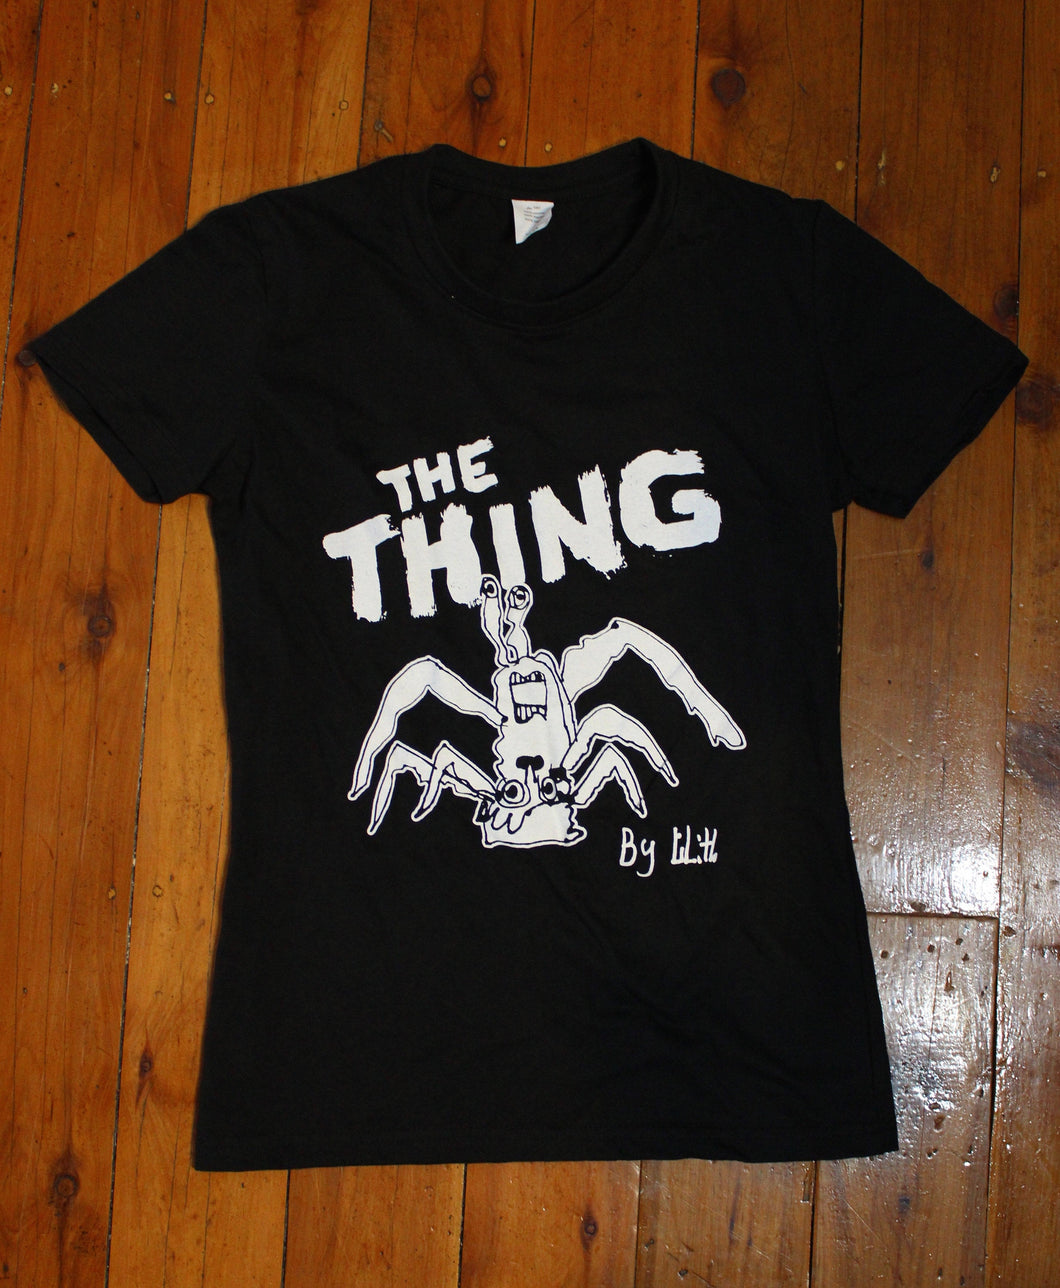 Women's The Thing by Lilith T-shirt